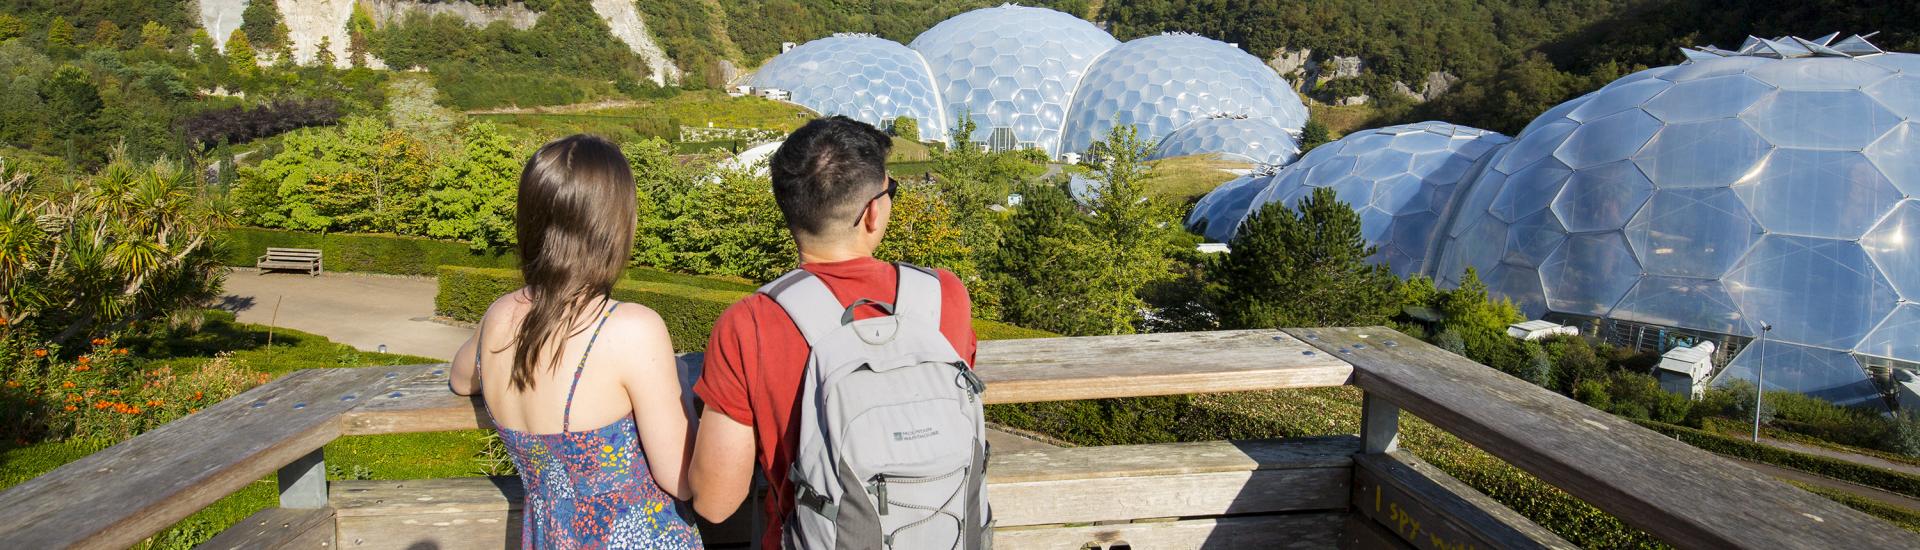 Young couple on Eden Project viewing platform